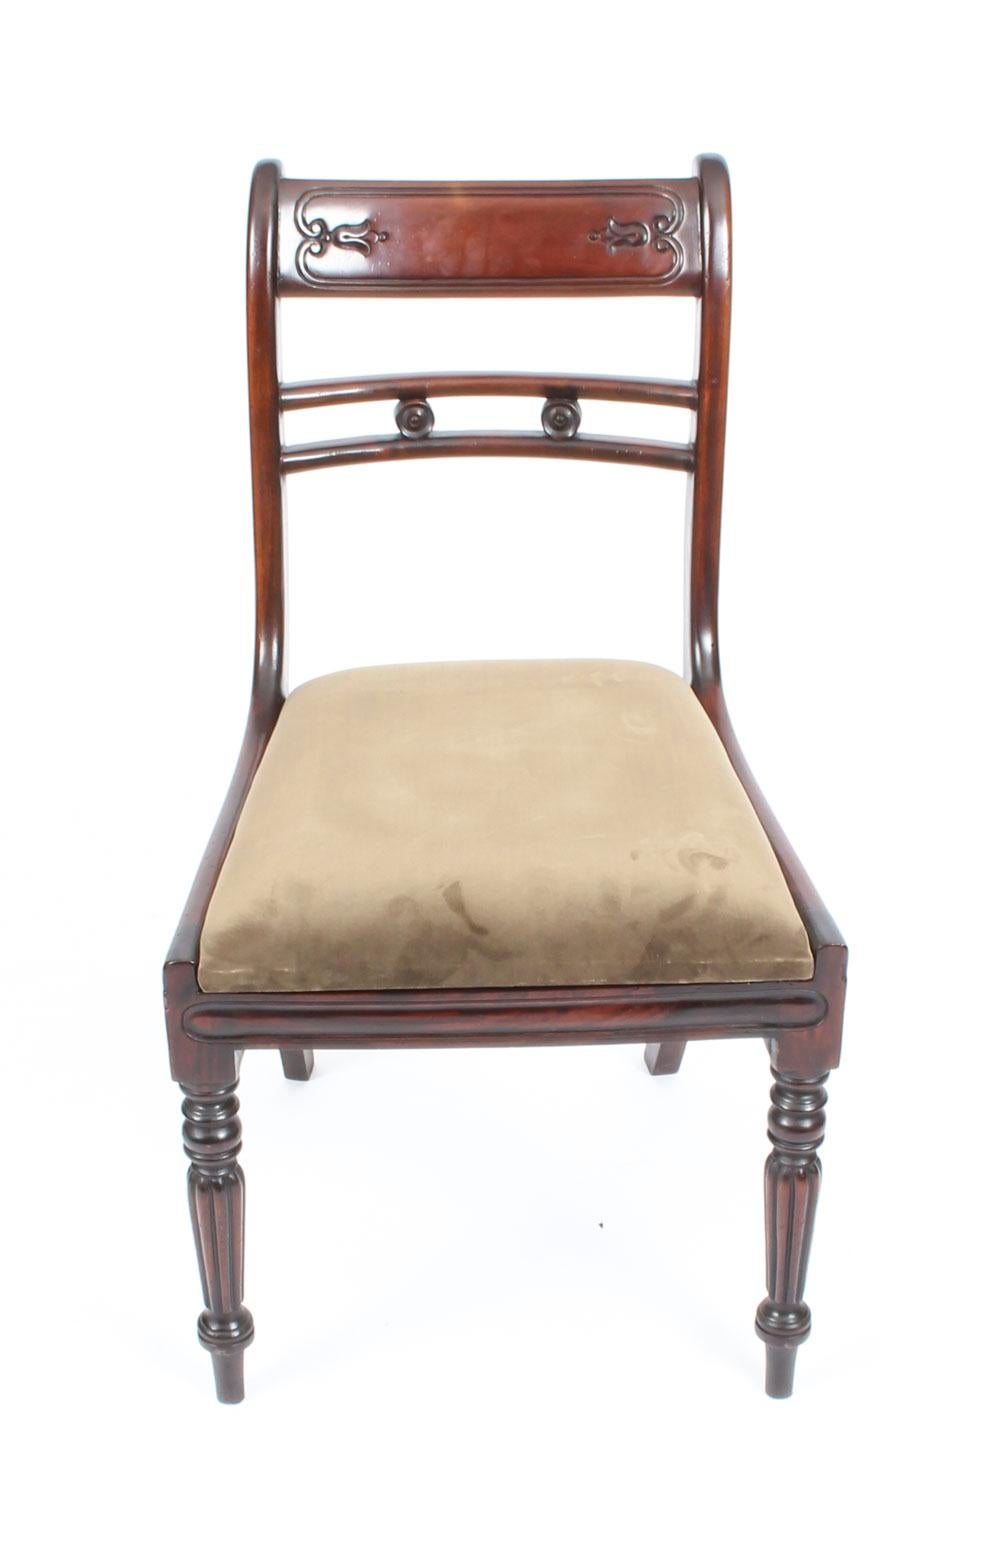 An absolutely fantastic English made pair of Regency style side chairs, dating from the late 20th century.

These chairs have been masterfully crafted in beautiful solid flame mahogany throughout and the finish and attention to detail on display